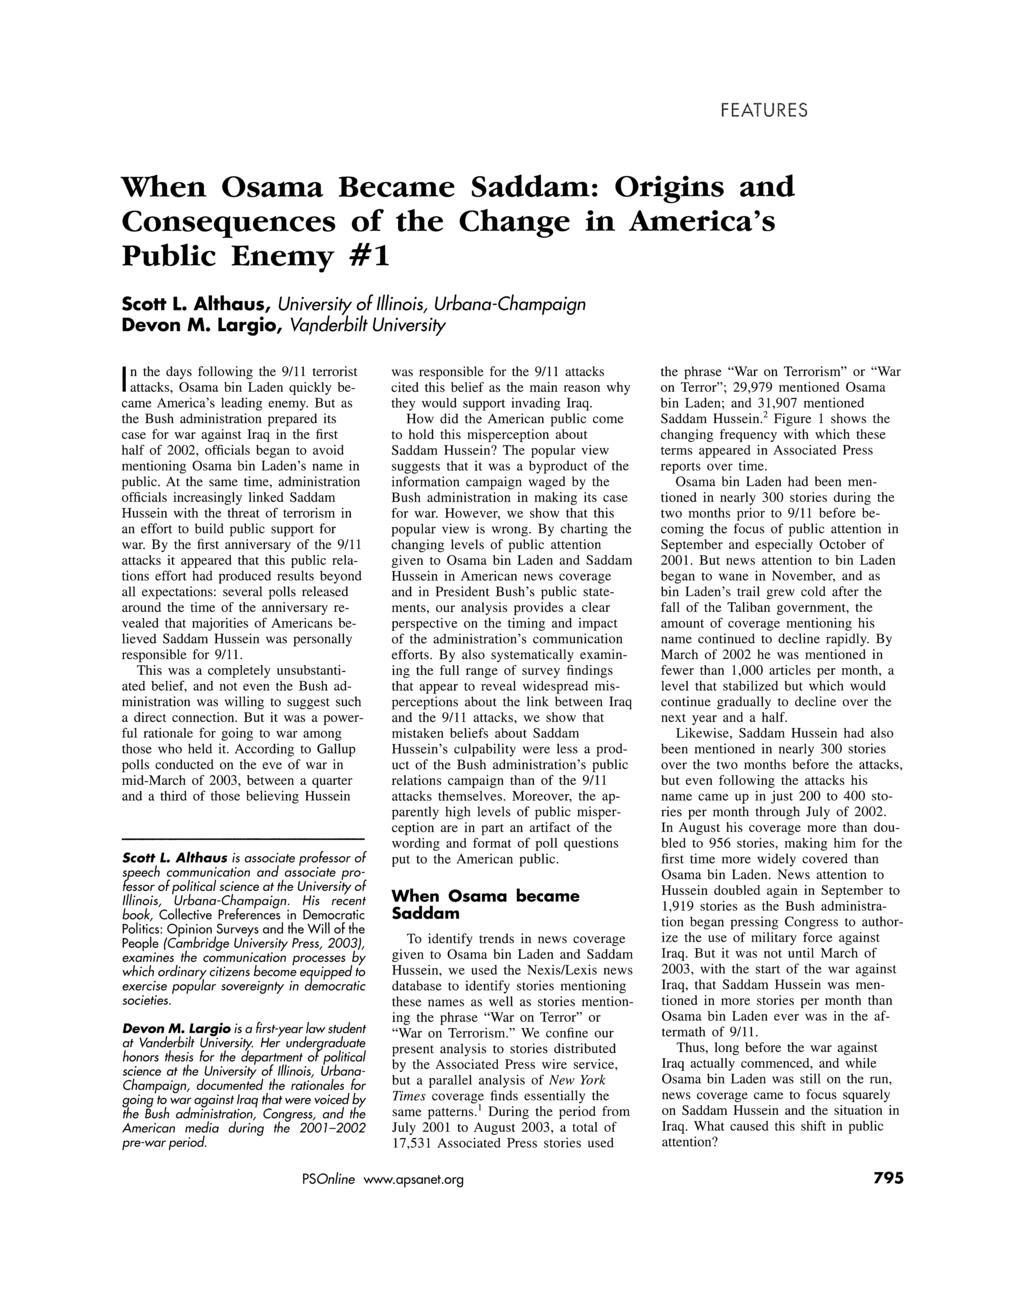 FEATURES When Osama Became Saddam: Origins and Consequences of the Change in America's Public Enemy #1 Scott L. Althaus, University of Illinois, Urbana-Champaign Devon M.